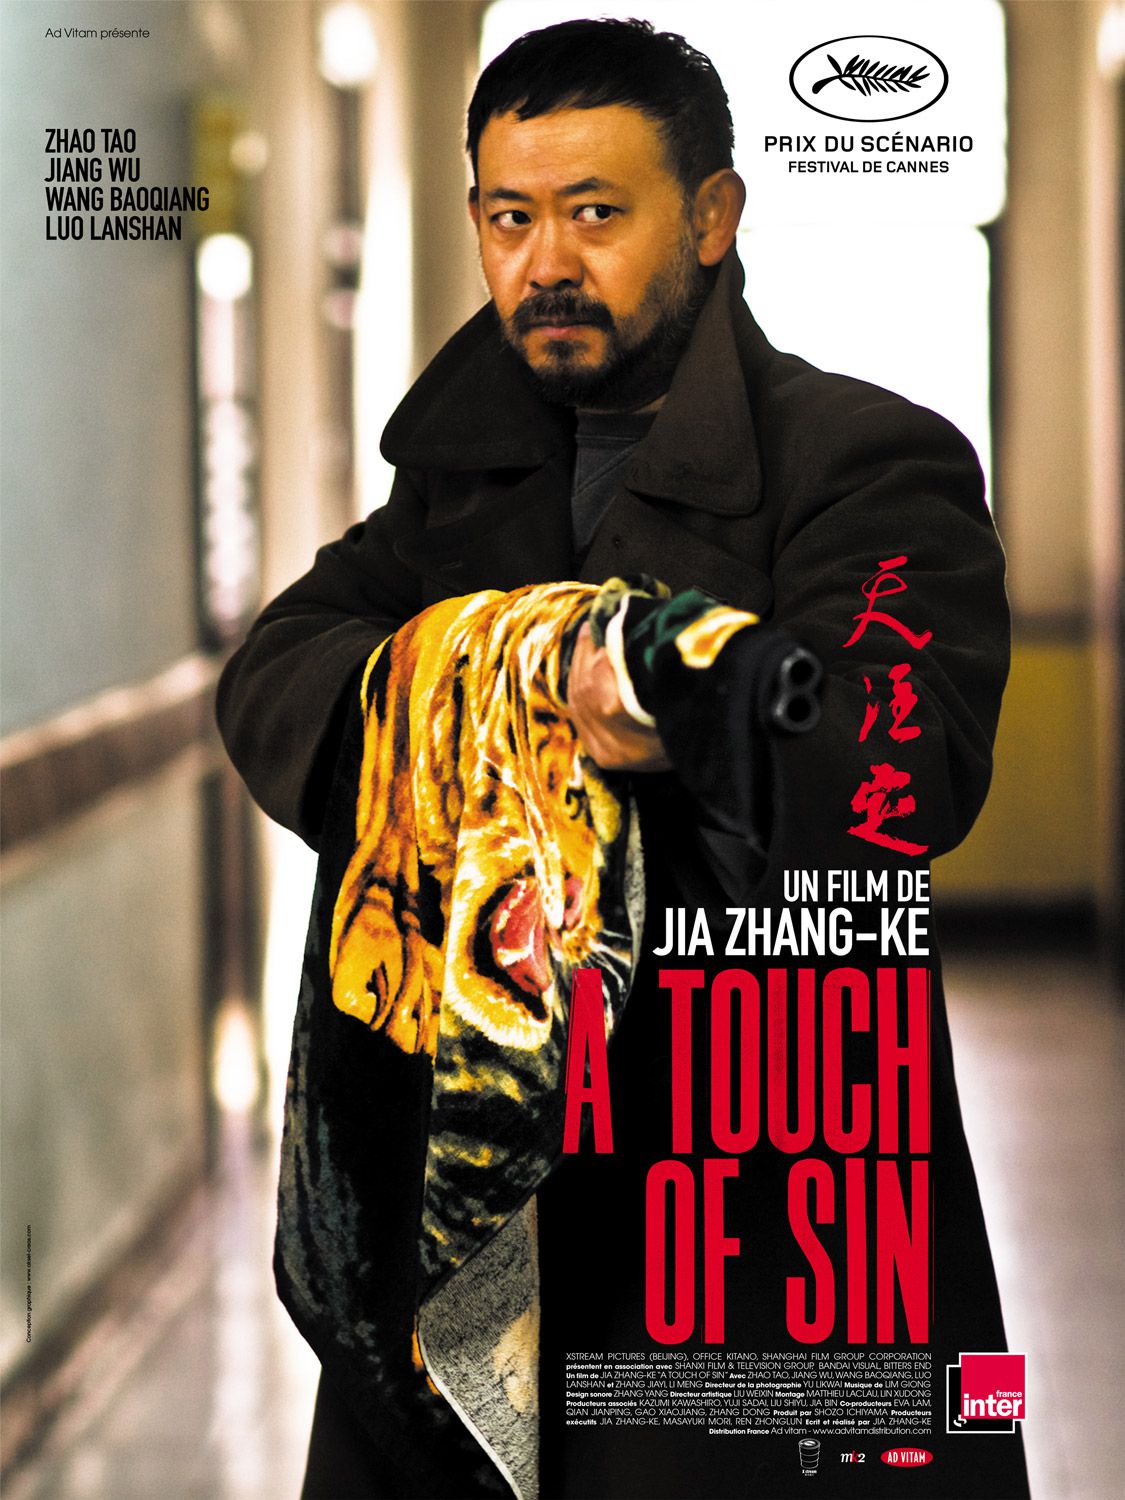 a touch of sin - A Touch Of Sin : Poussés à bout affiche A Touch of Sin Tian zhu ding 2013 1